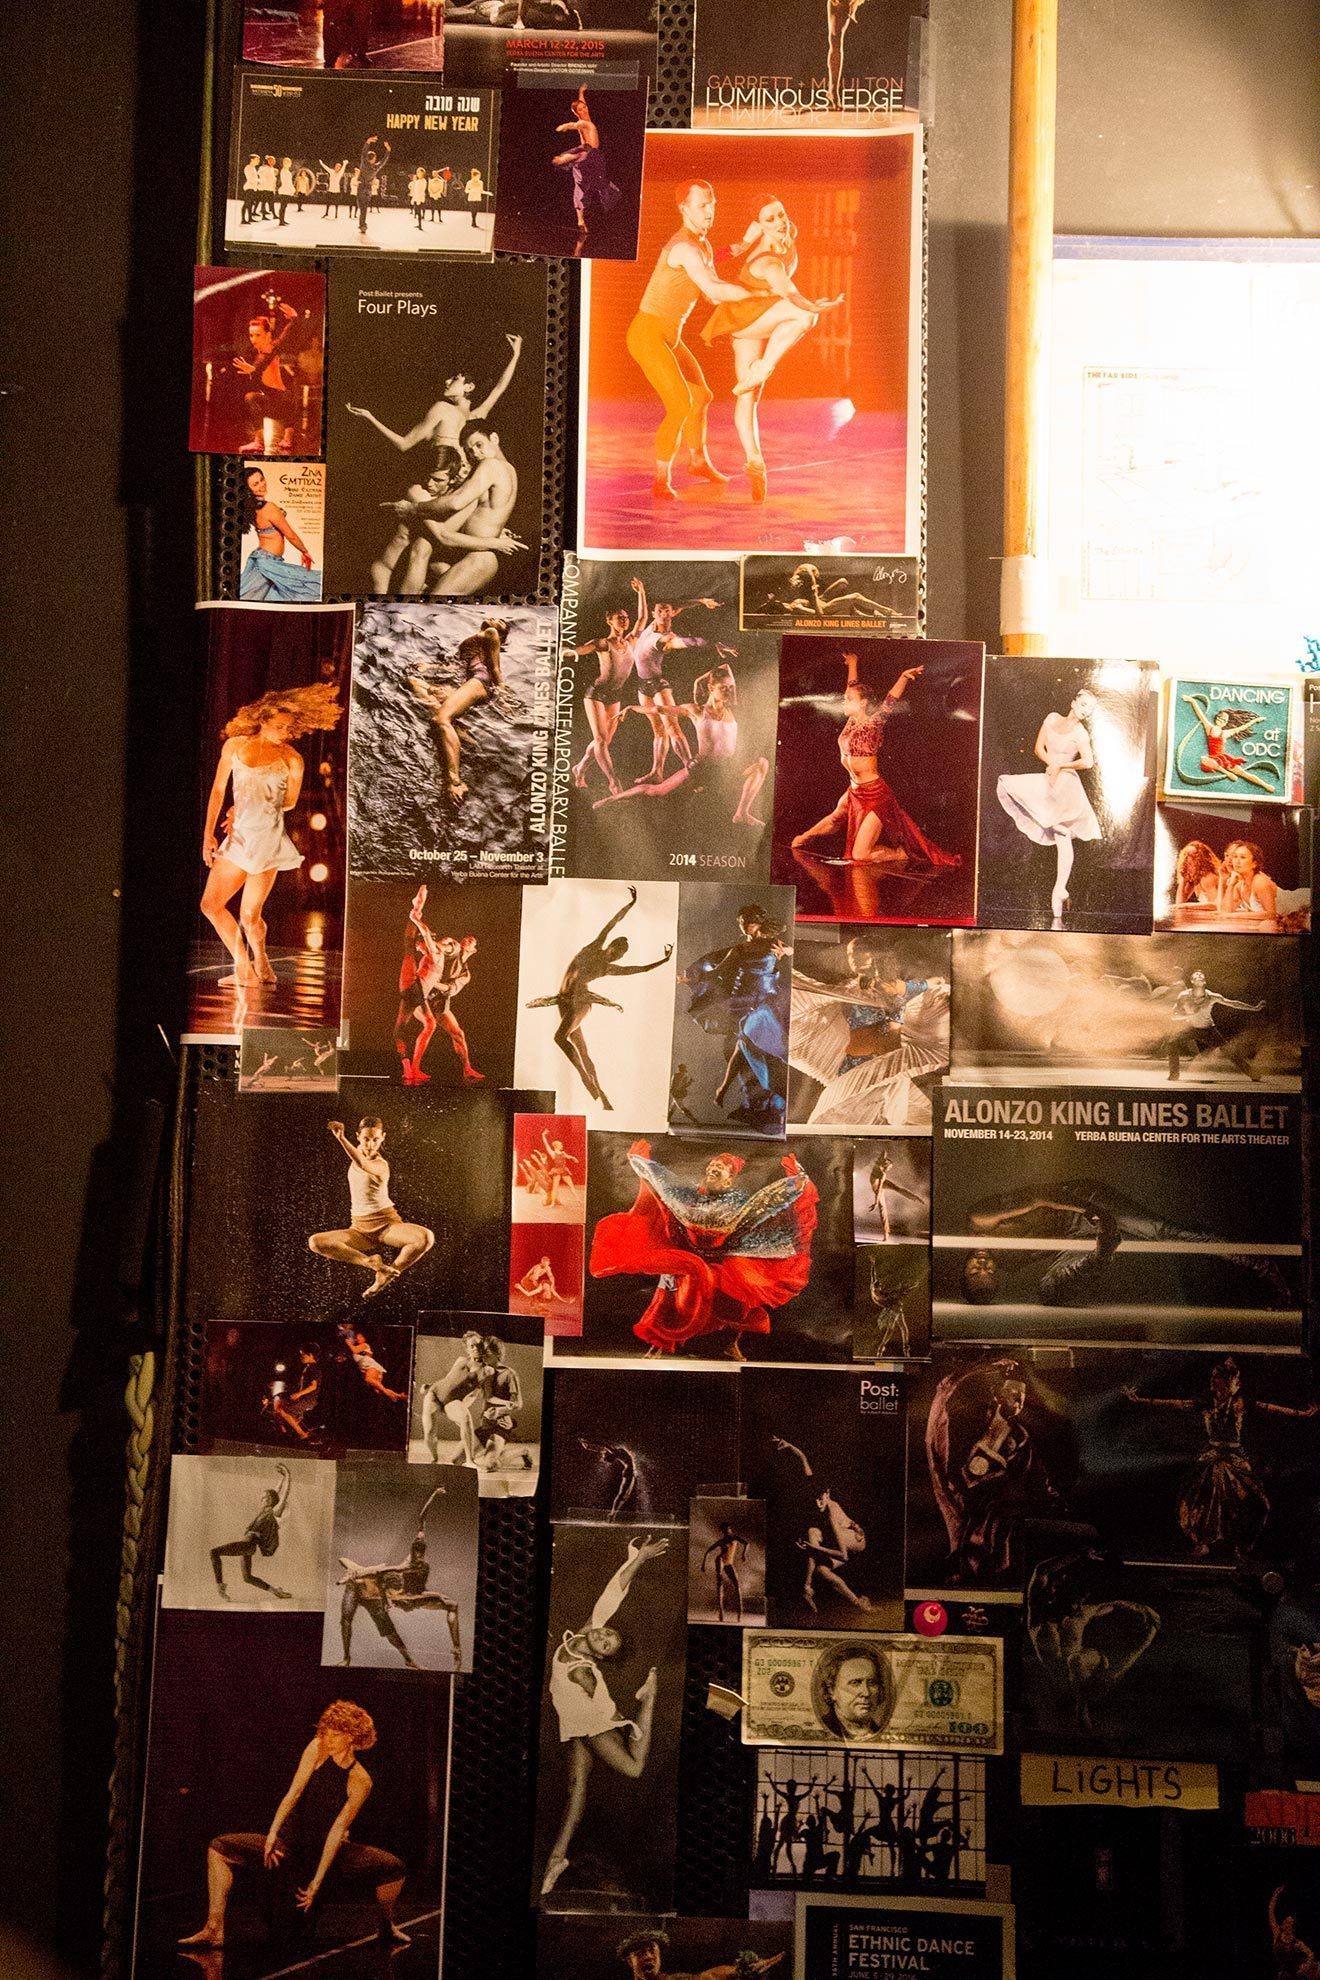 Also backstage, a collection of poster and playbill art